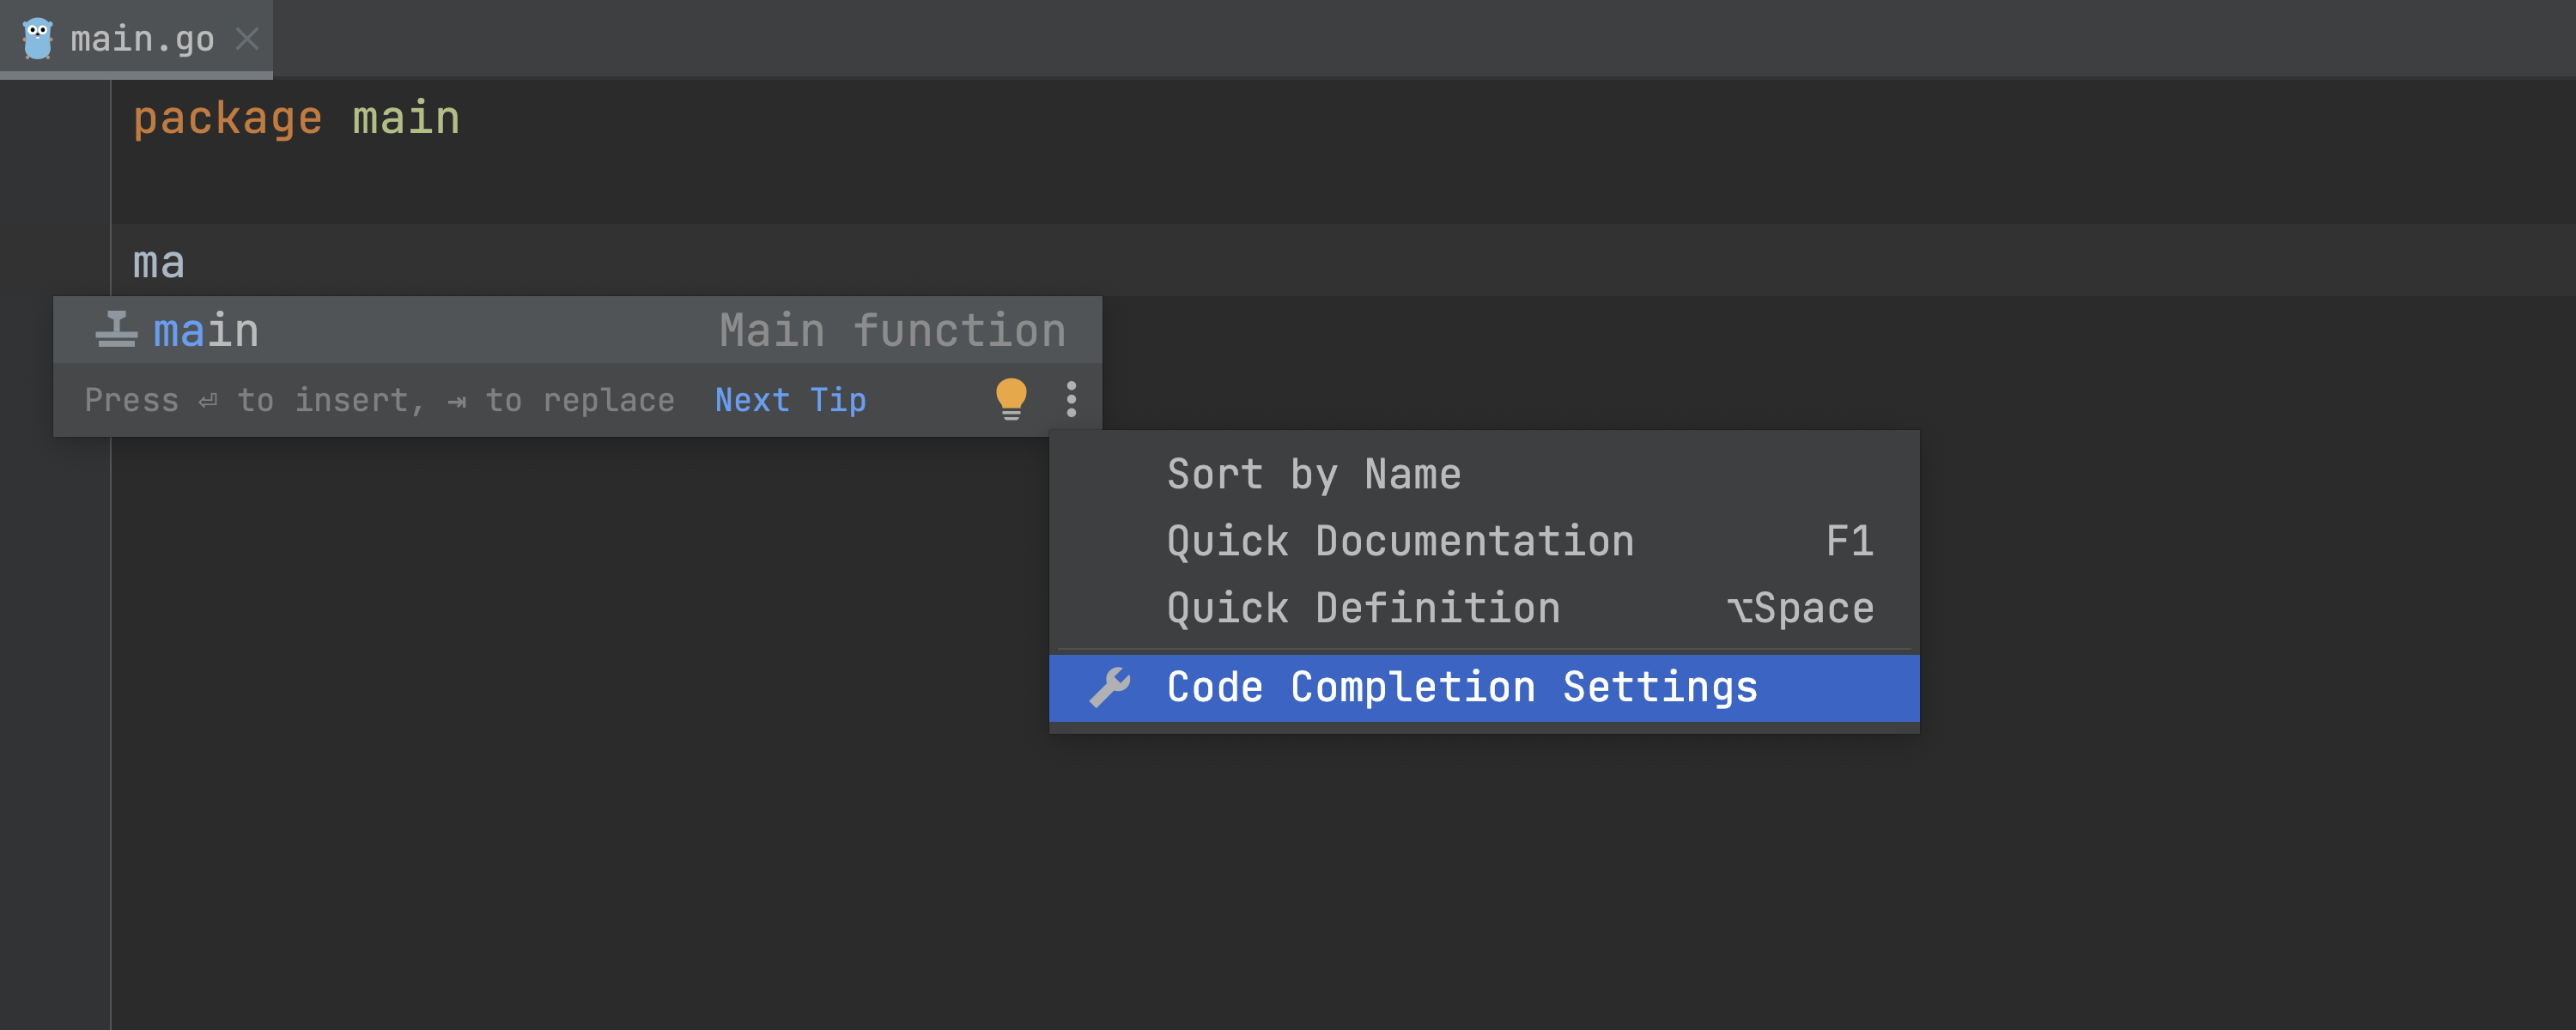 The popup window that provides access to Code Completion Settings